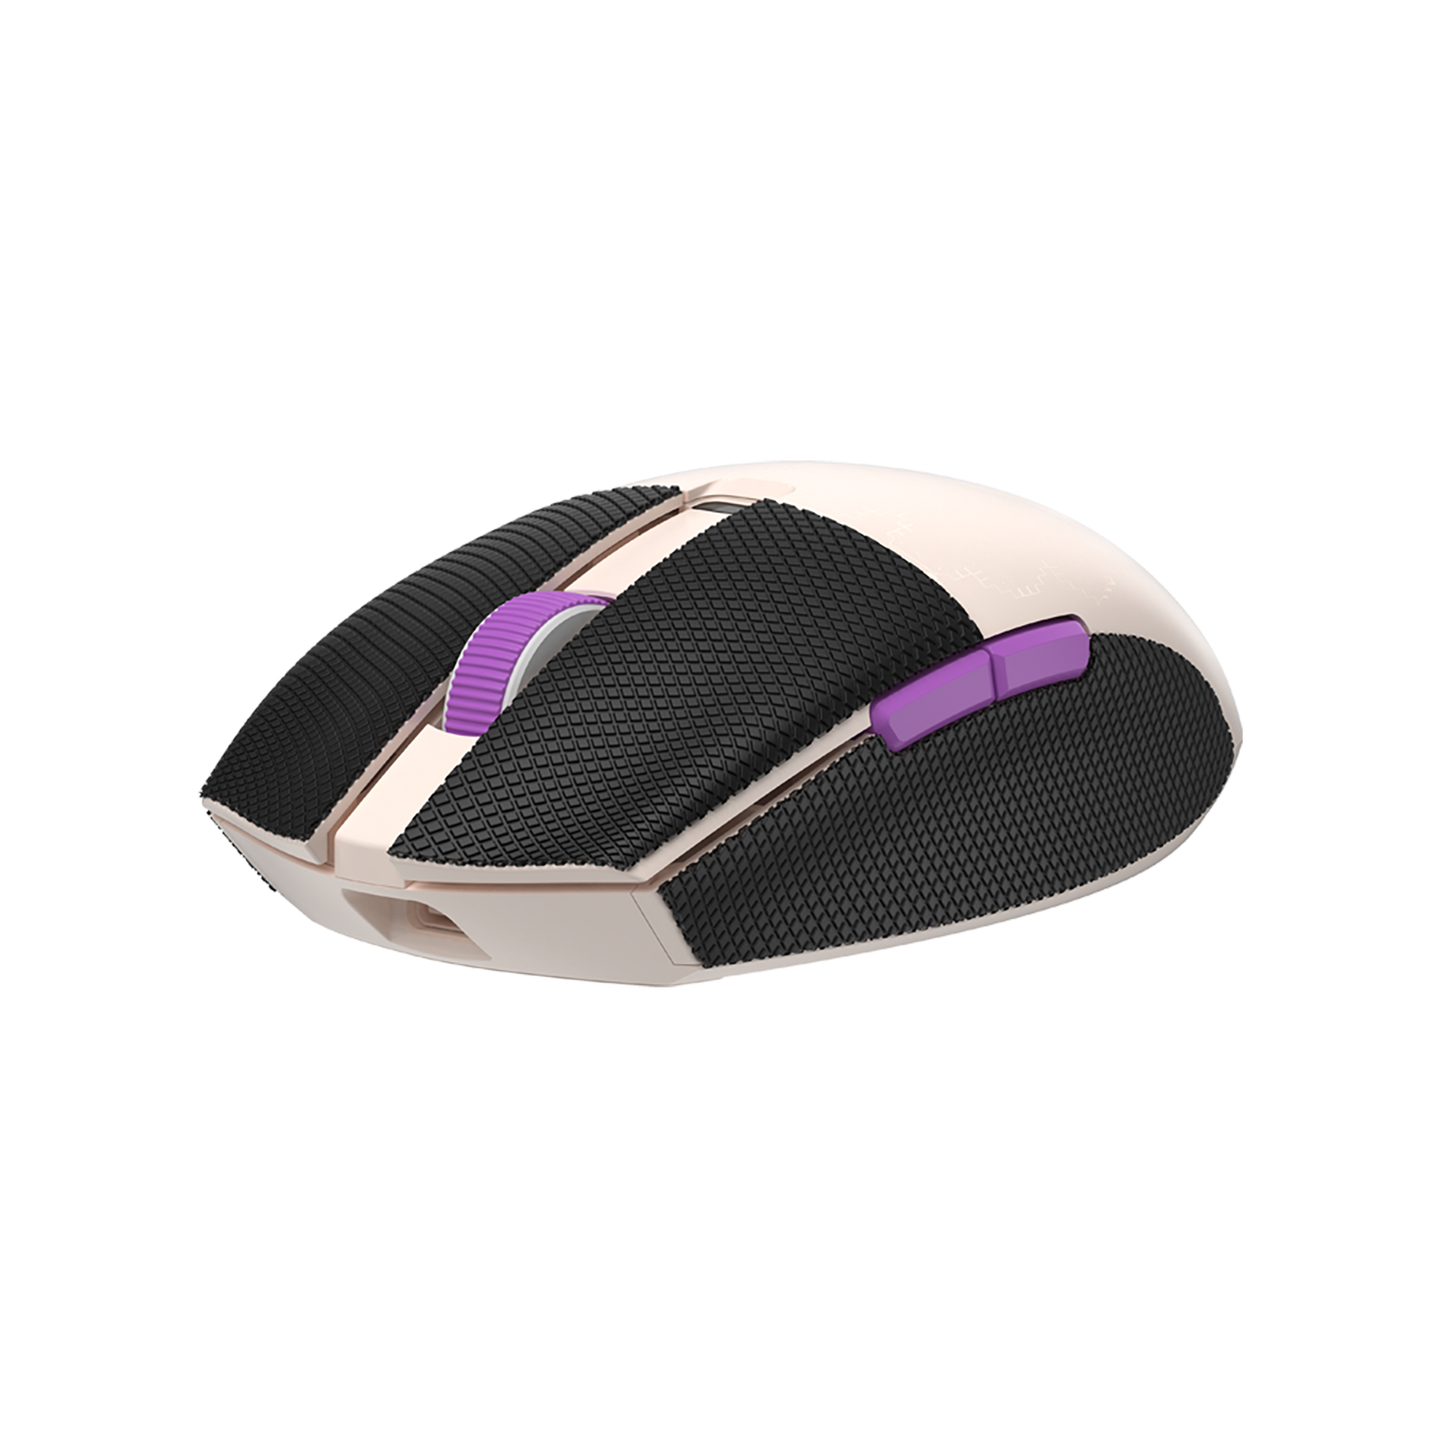 Fantech Aria XD7 Gaming PC Mouse Wireless Light-Weight Computer Mice (Beige)